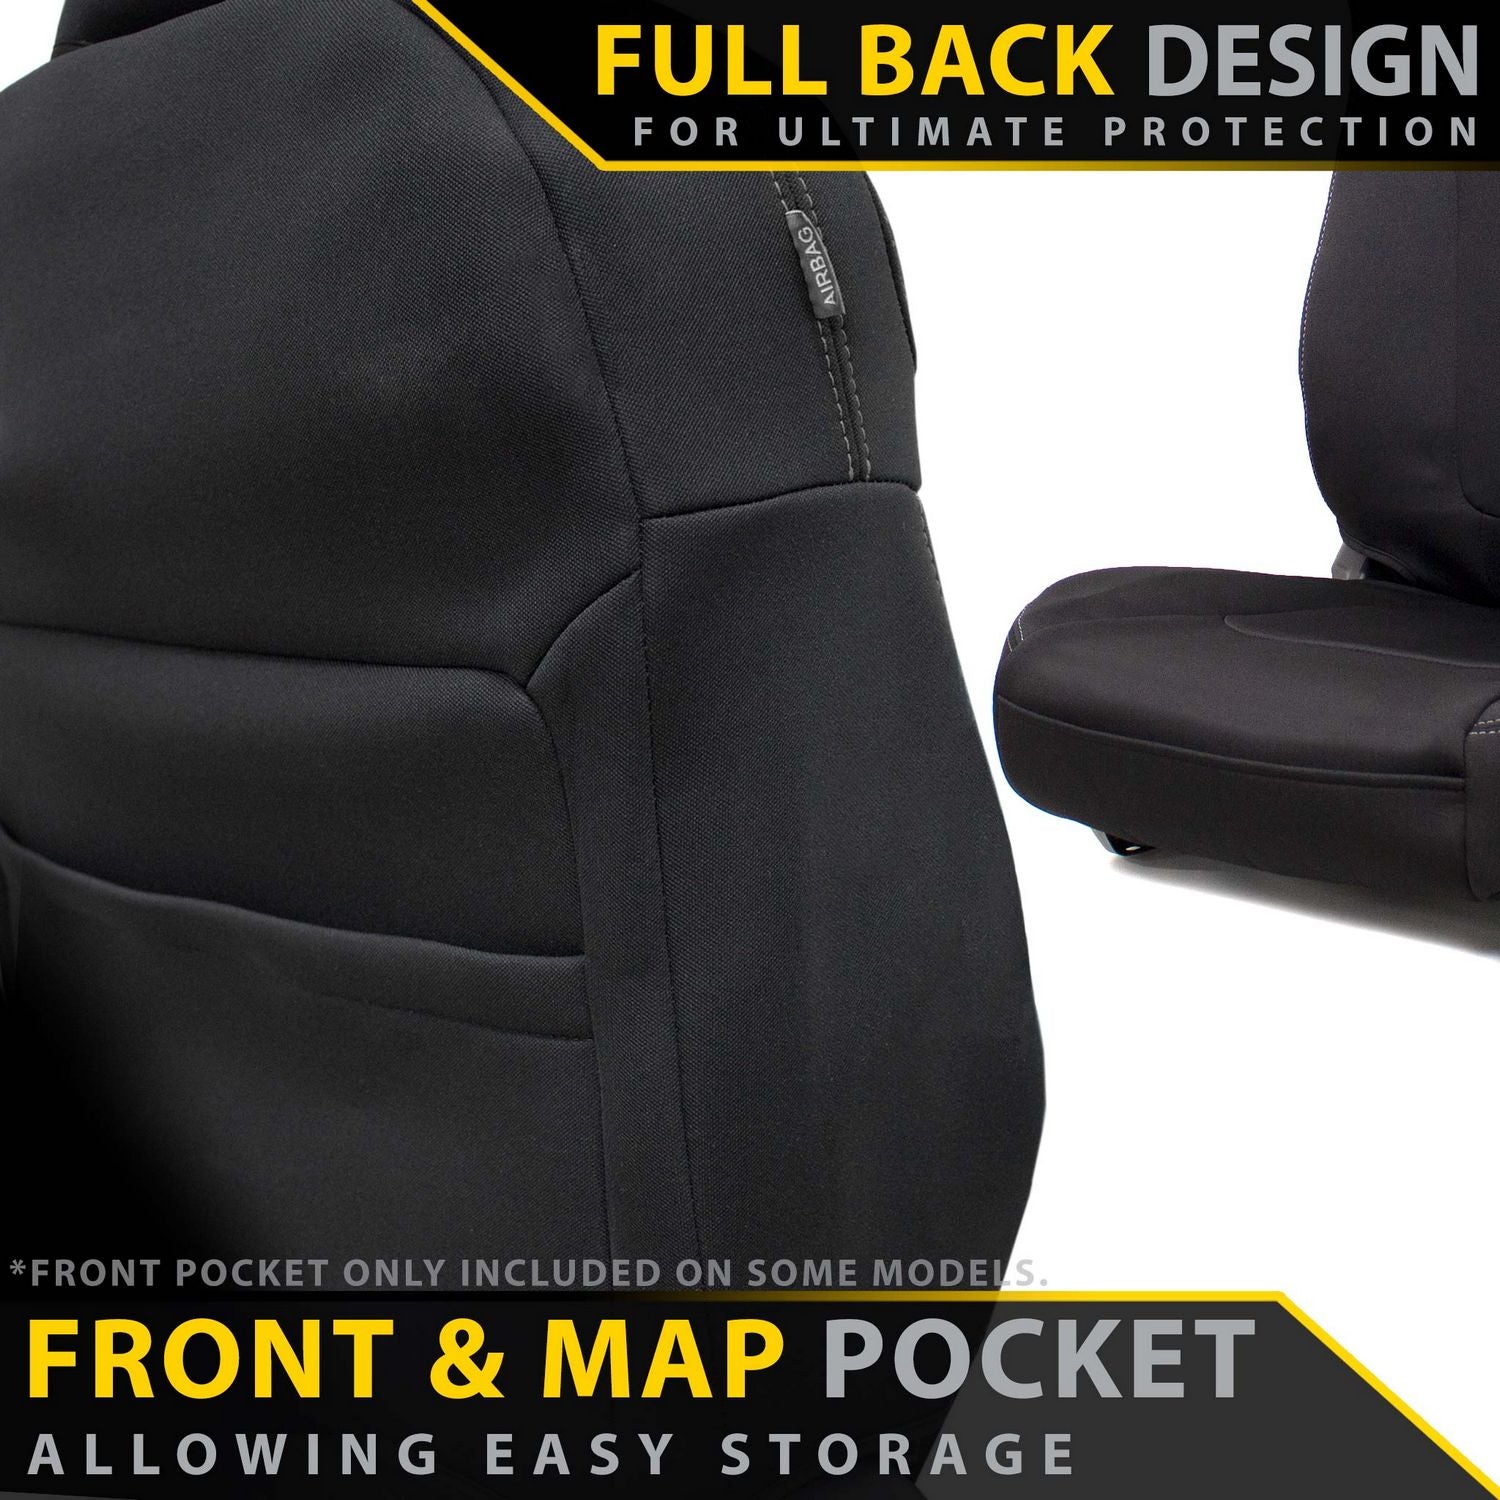 Toyota Landcruiser 79 Single Cab (Sep 2016+) Neoprene 2x Front Seat Covers (Available)